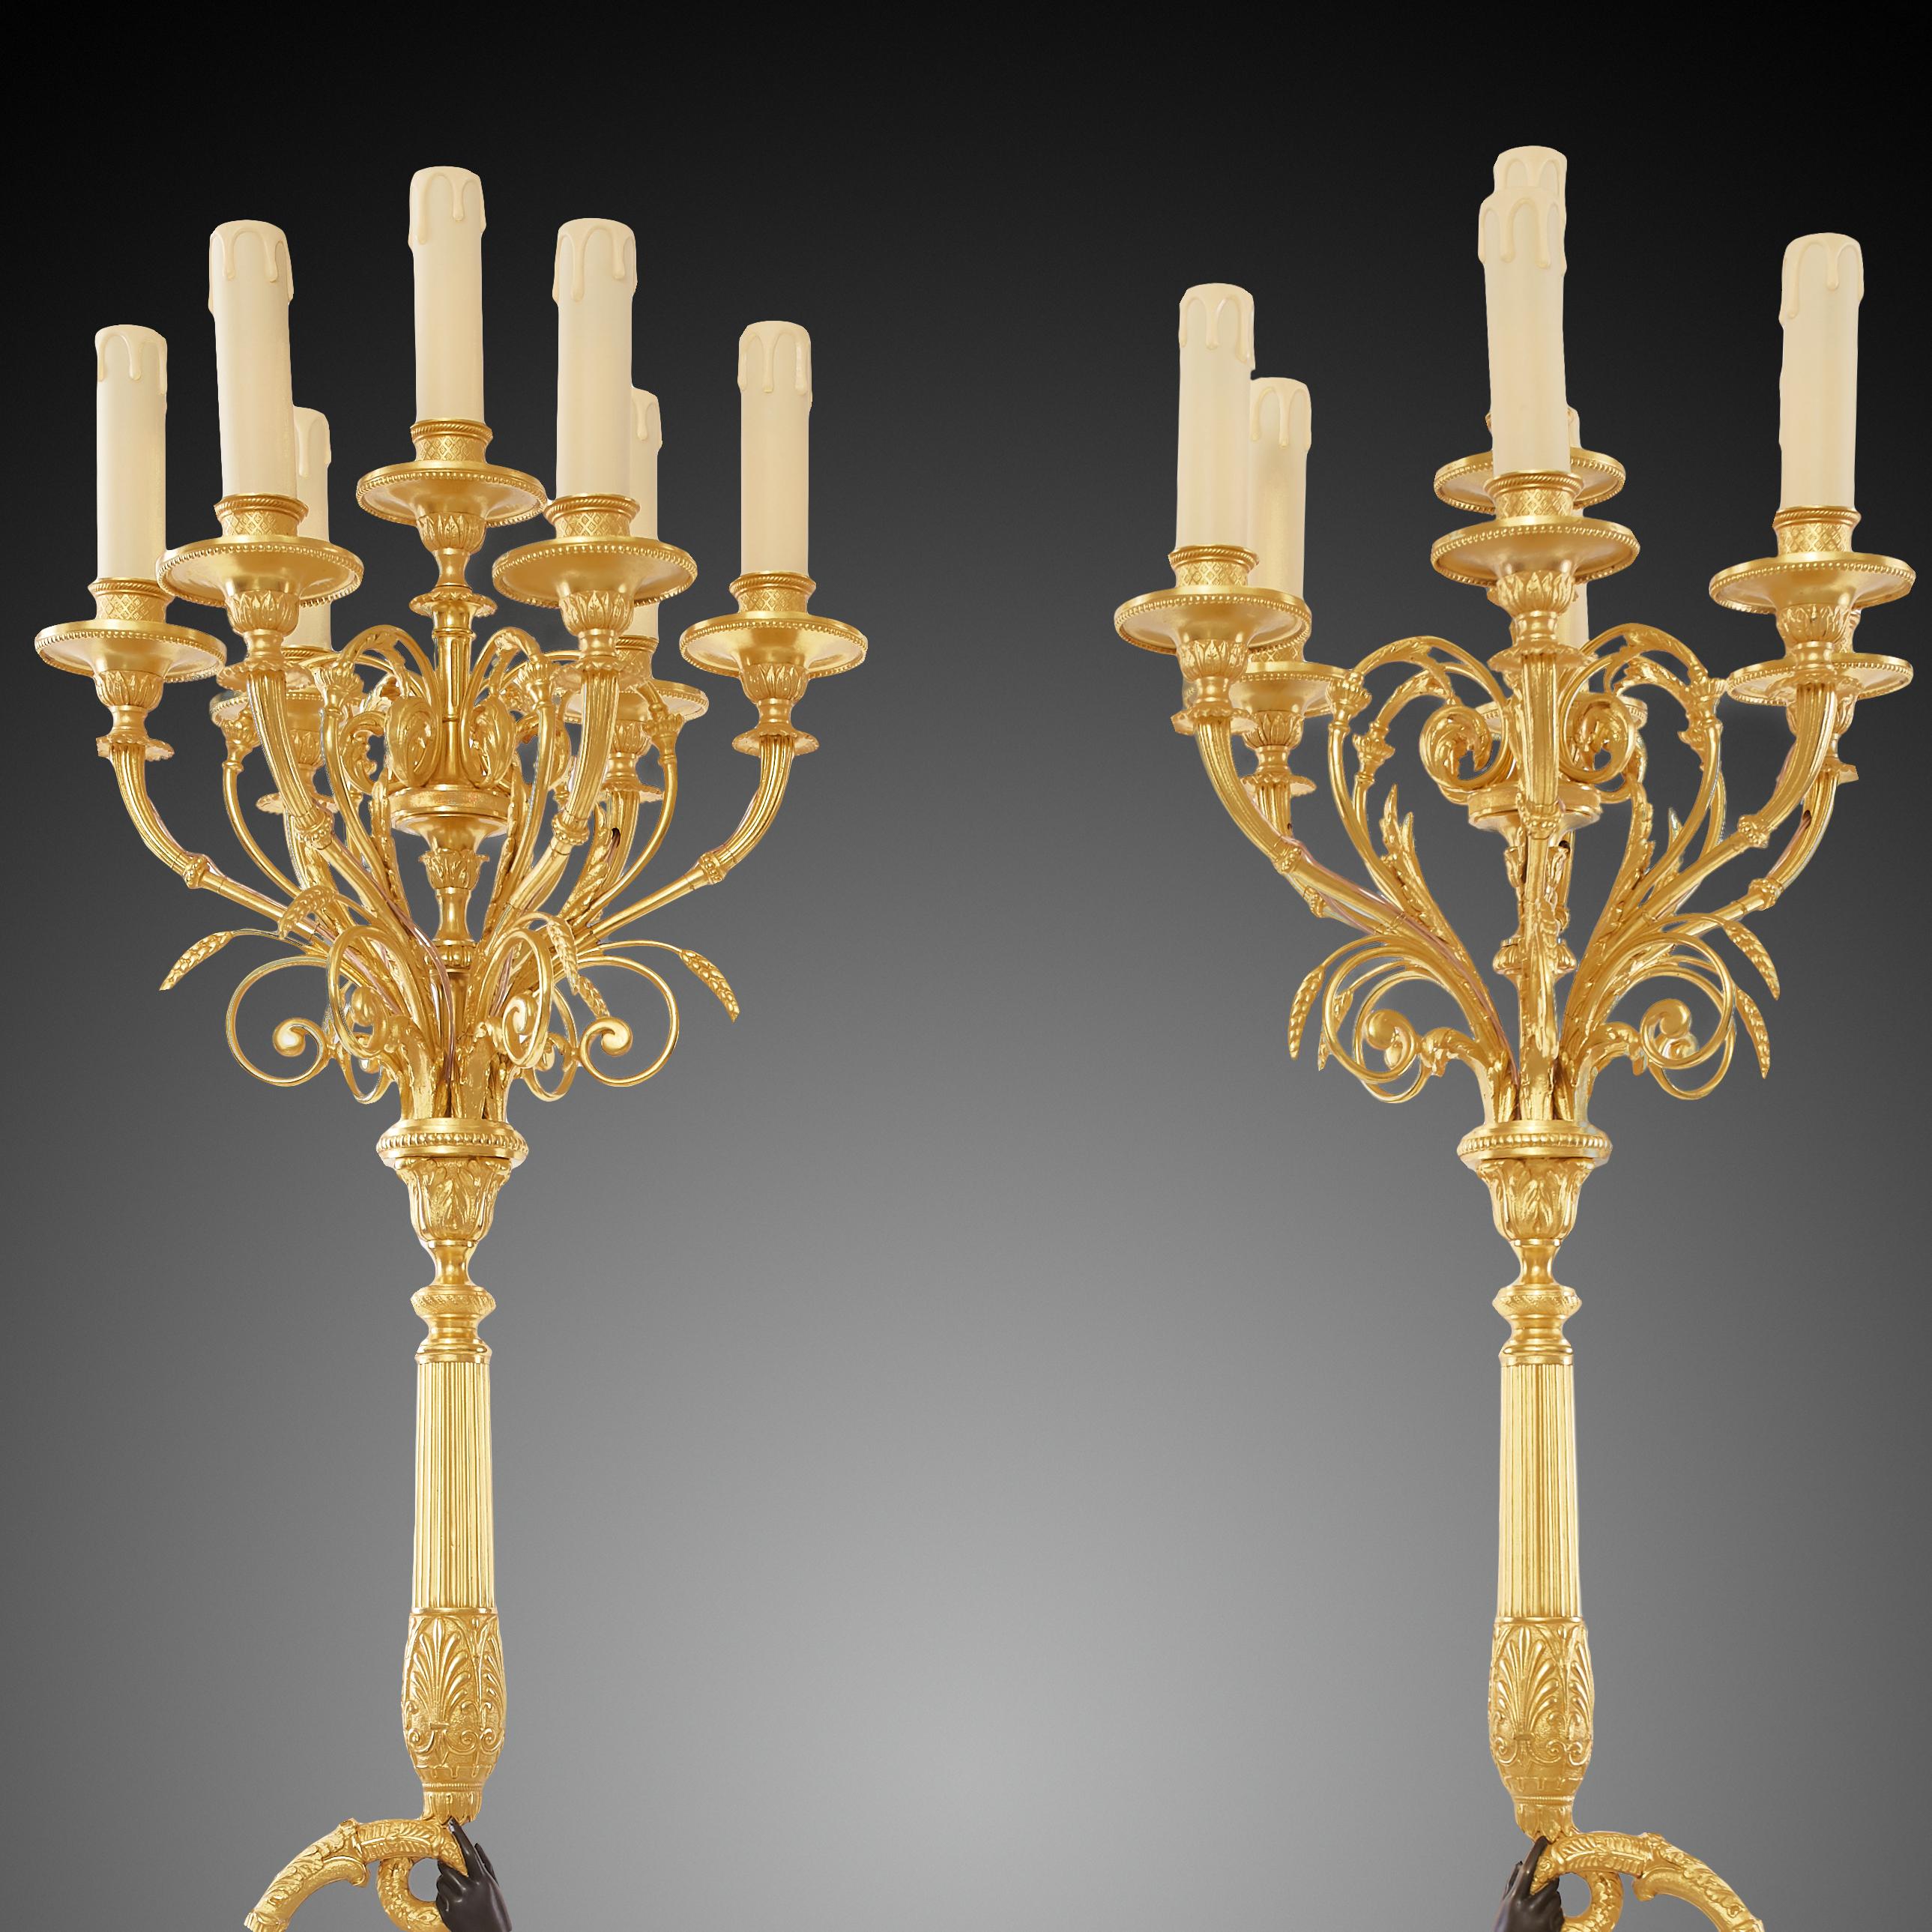 Pair of Candelabra 19th Century Louis-Philippe For Sale 3